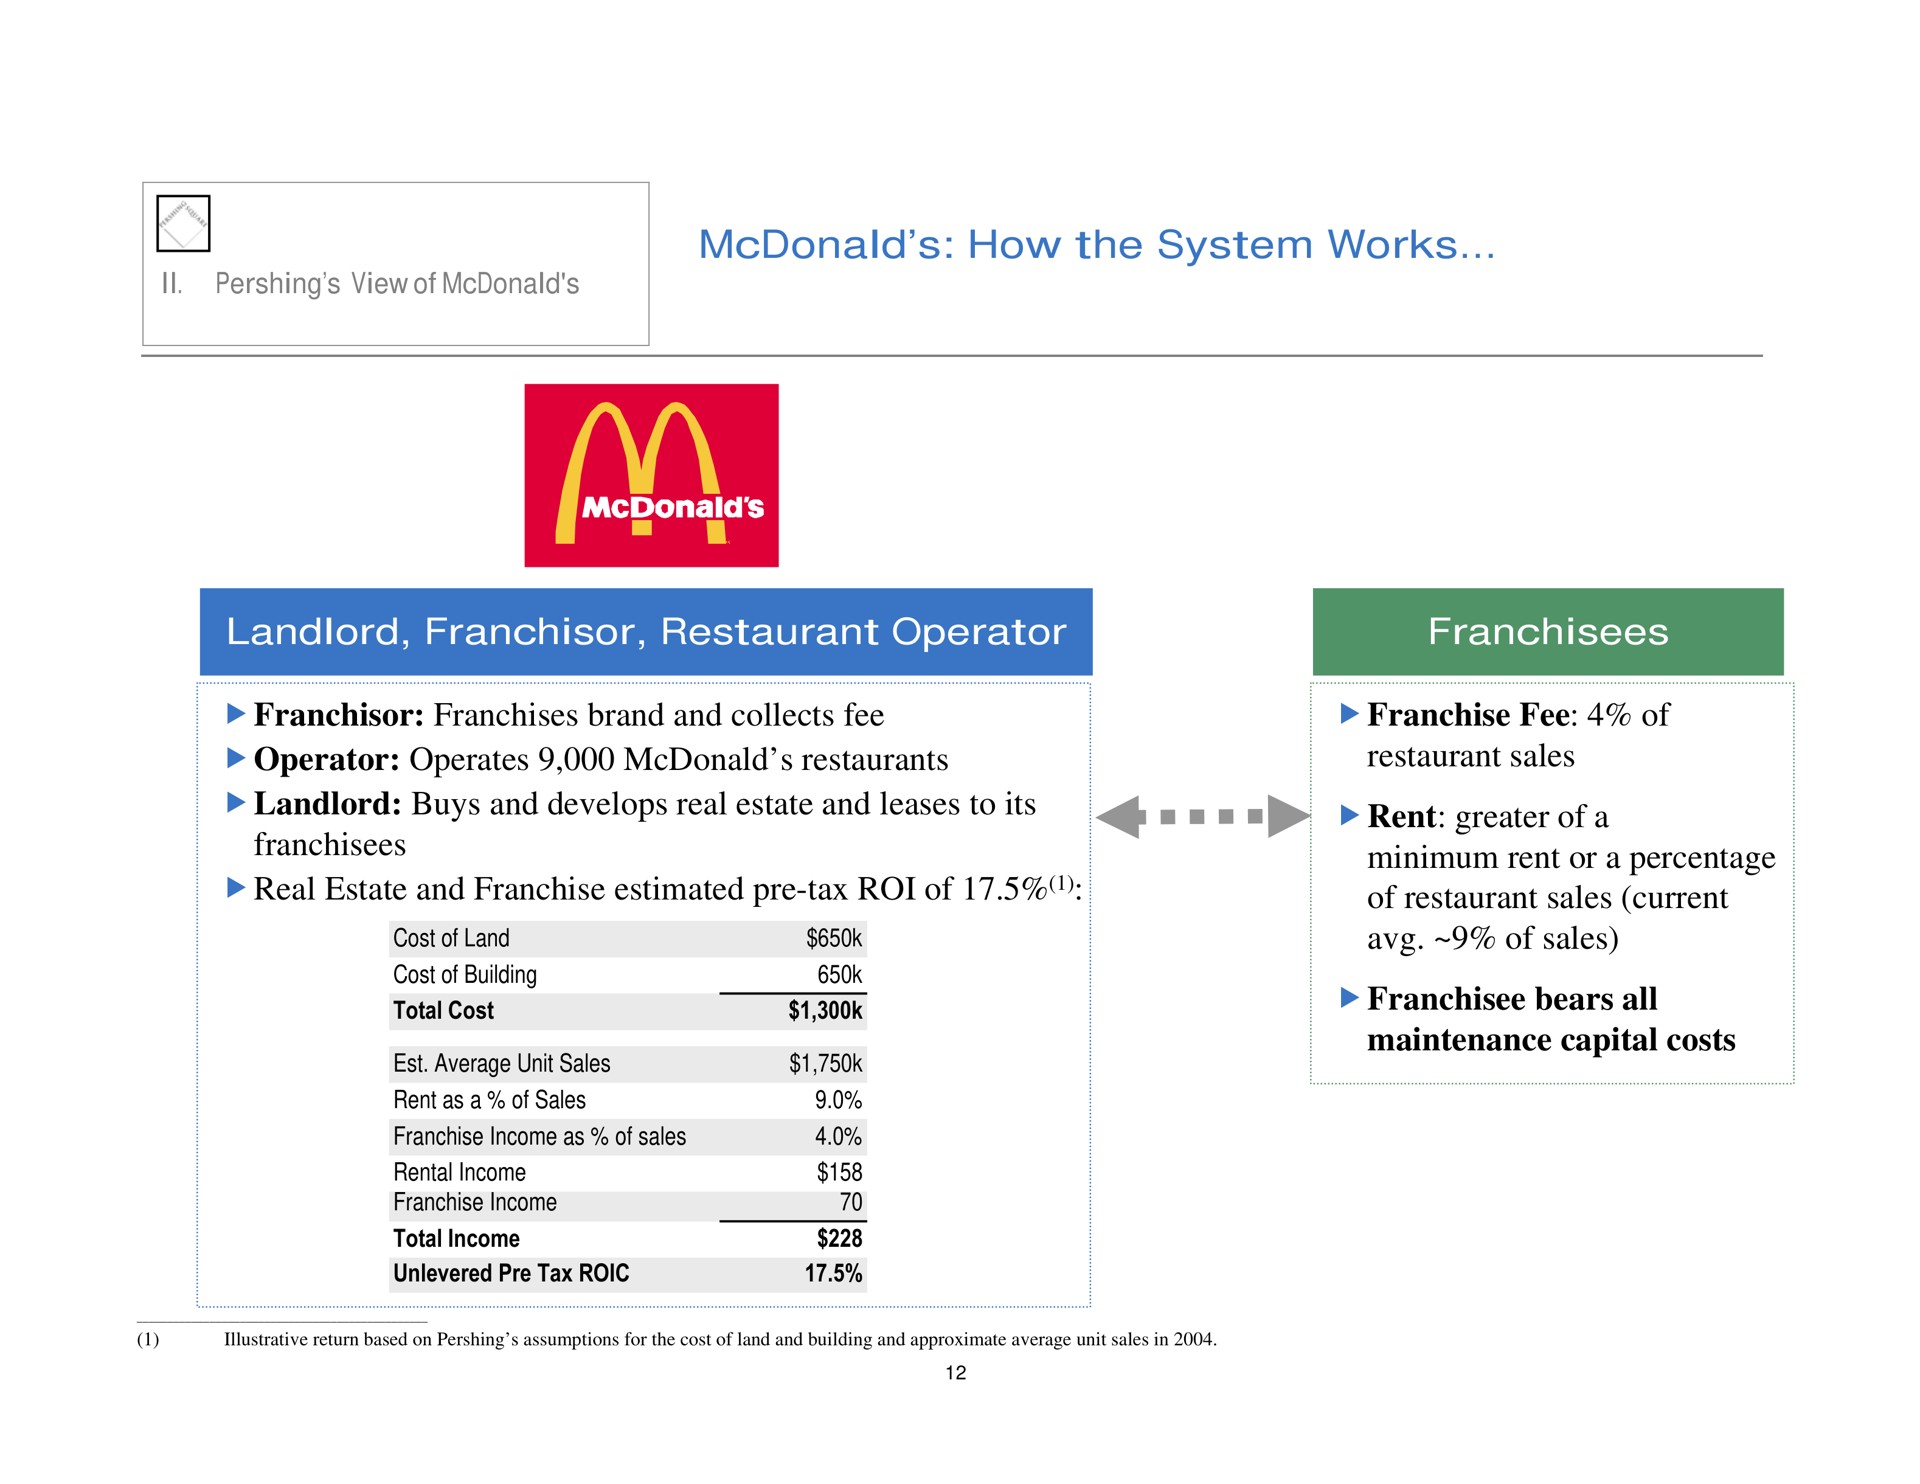 how the system works landlord restaurant operator franchisees franchises brand and collects fee operator operates restaurants landlord buys and develops real estate and leases to its franchisees real estate and franchise estimated tax roi of franchise fee of restaurant sales rent greater of a minimum rent or a percentage of restaurant sales current of sales bears all maintenance capital costs cost land cost building | Pershing Square